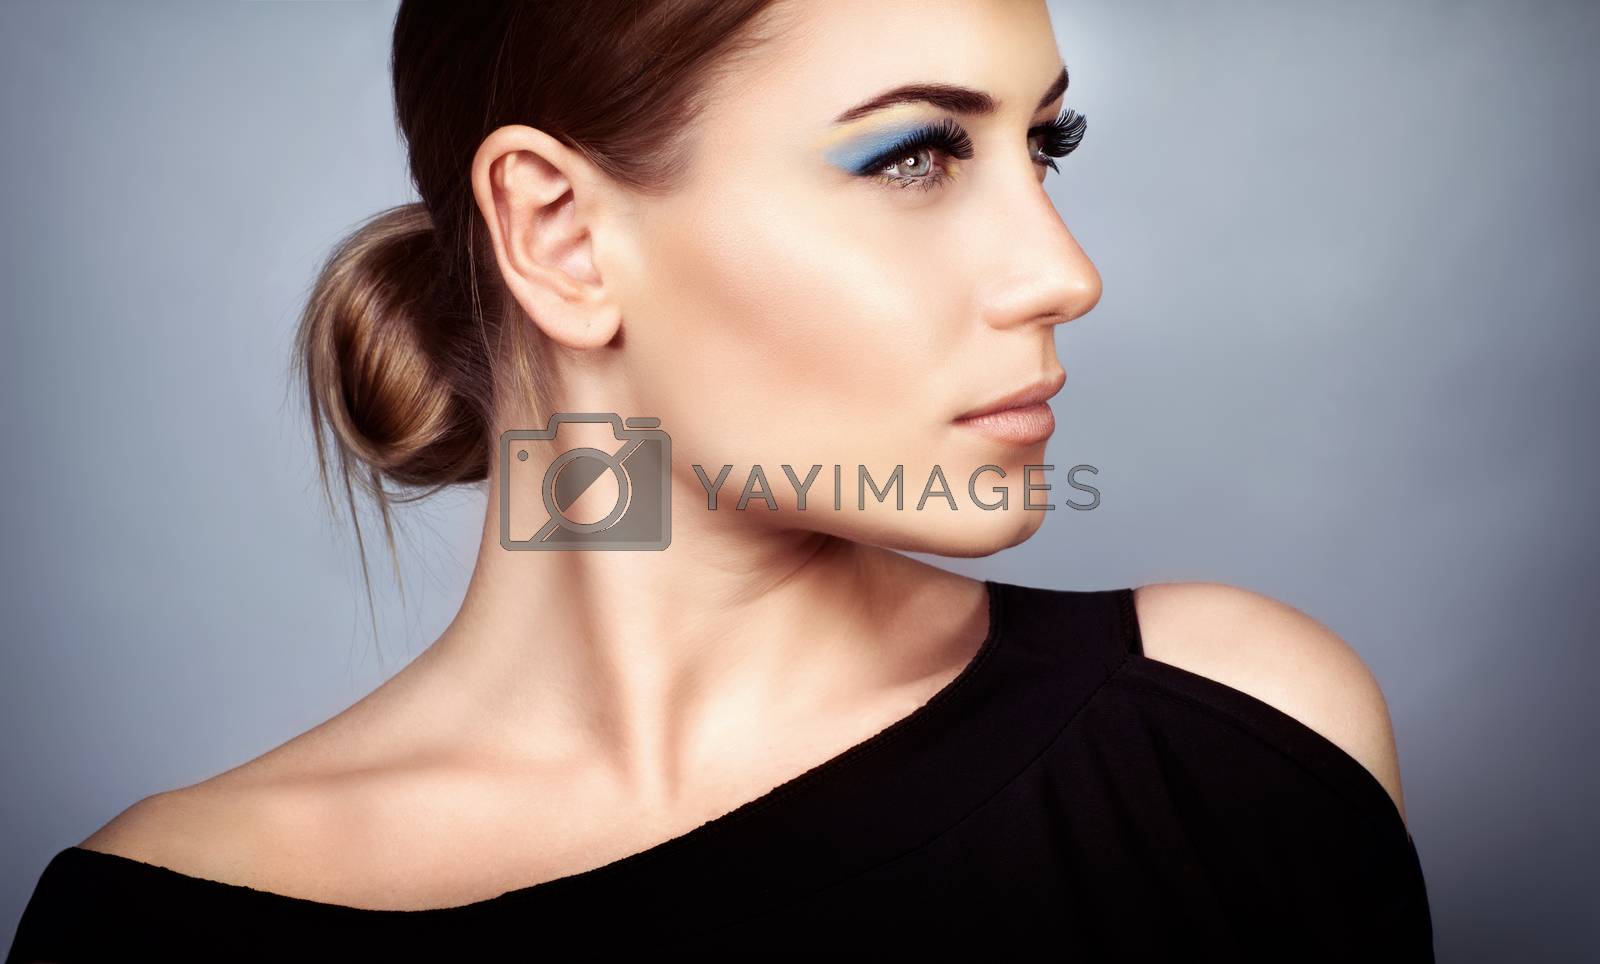 Portrait of a beautiful young woman with stylish makeup over on gray background, profile face, gorgeous fashion look